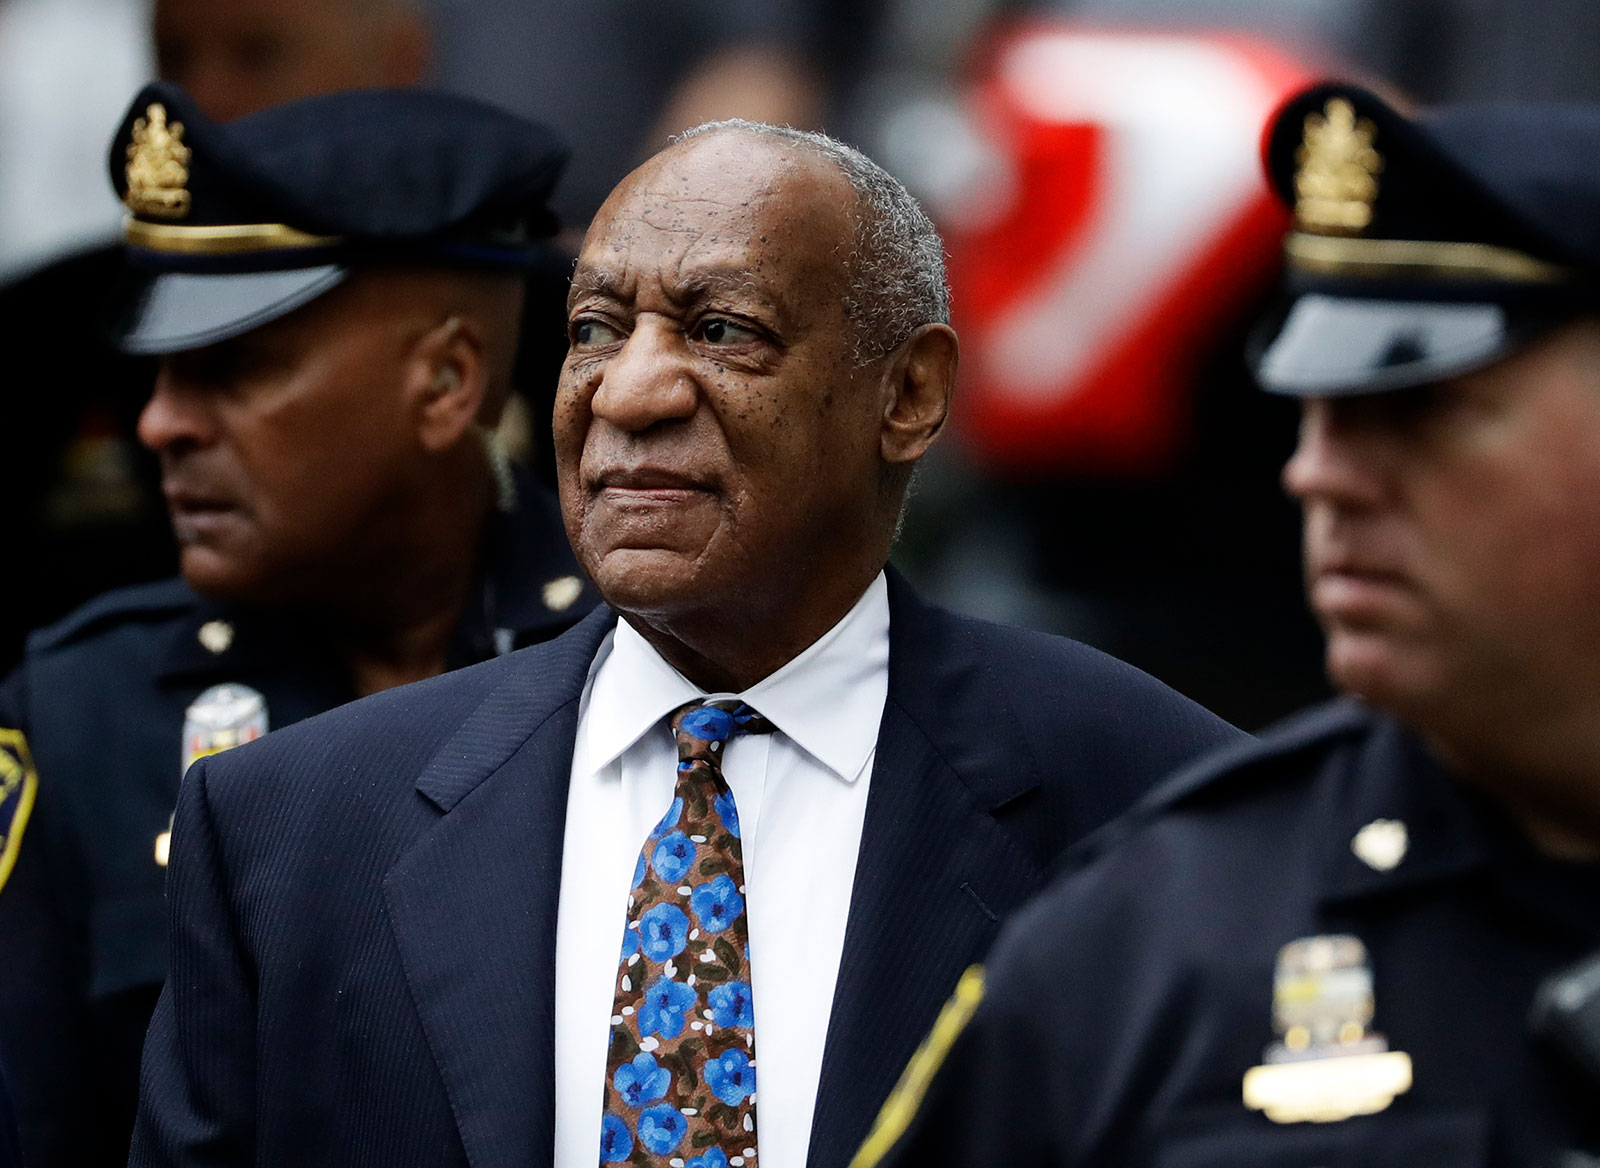 Cosby's due process rights were "violated," Pennsylvania court ruled